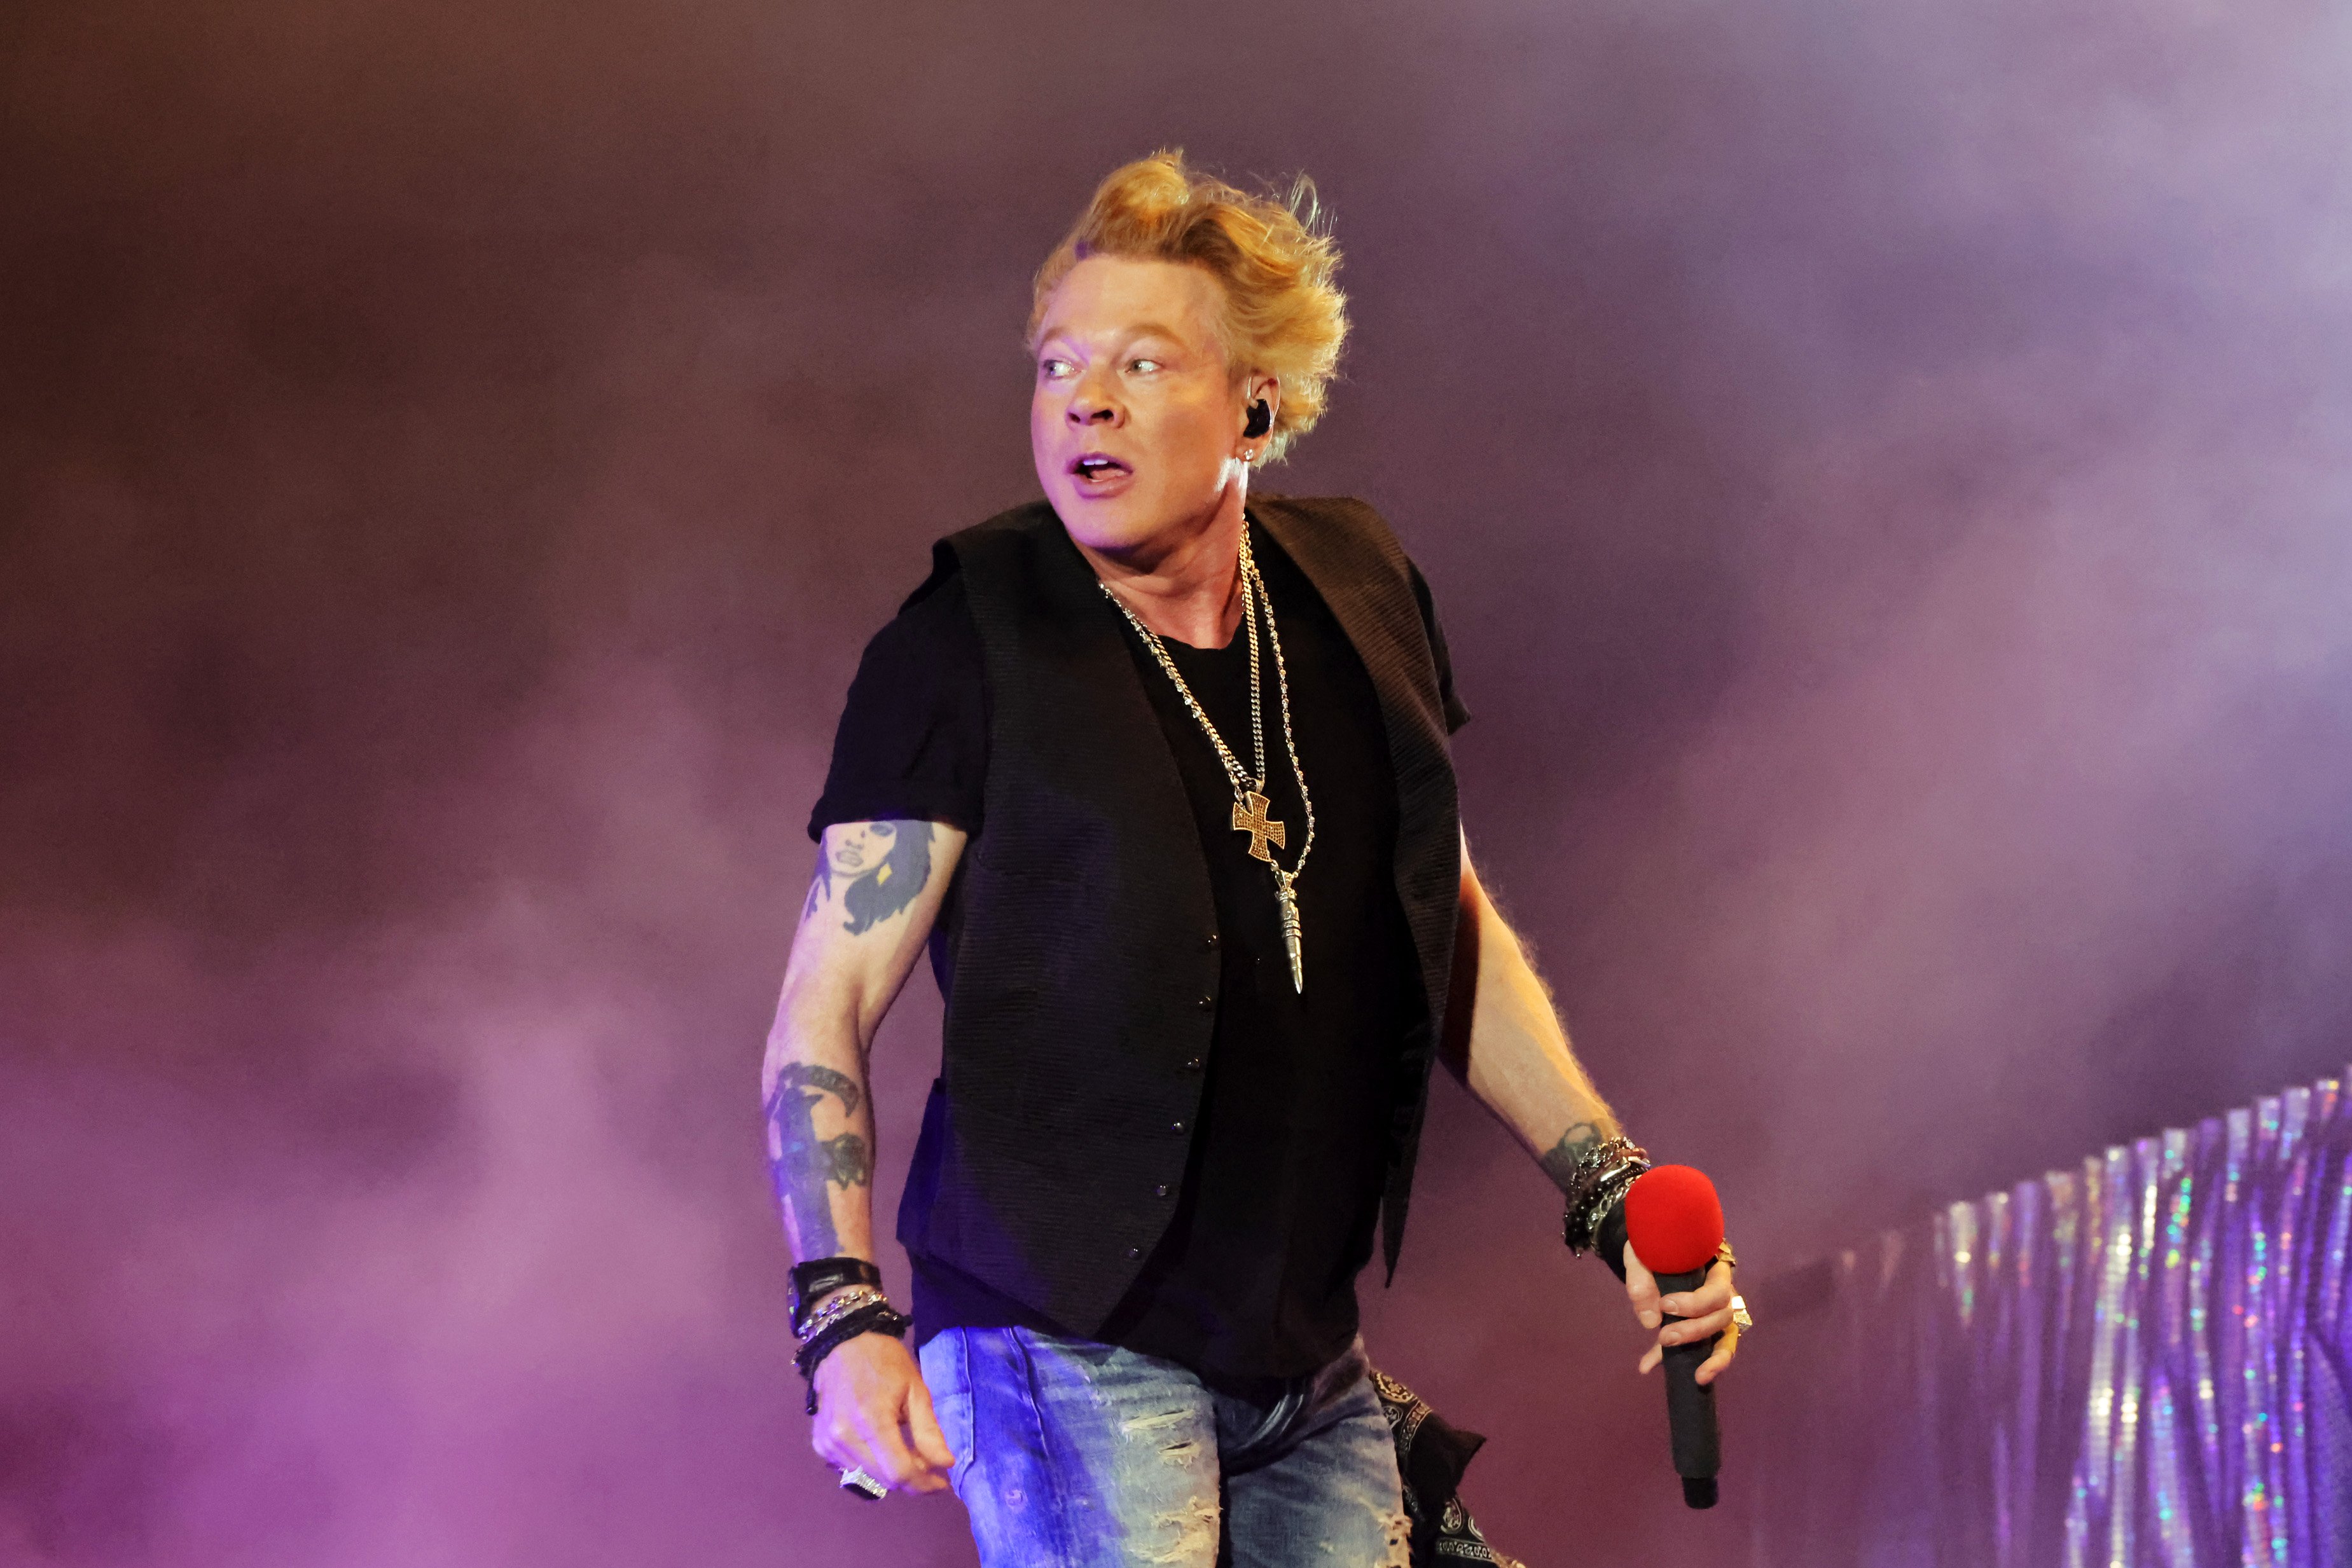 Axl Rose of Guns N' Roses at the Empire Polo Field on April 30, 2022, in Indio, California. | Source: Getty Images